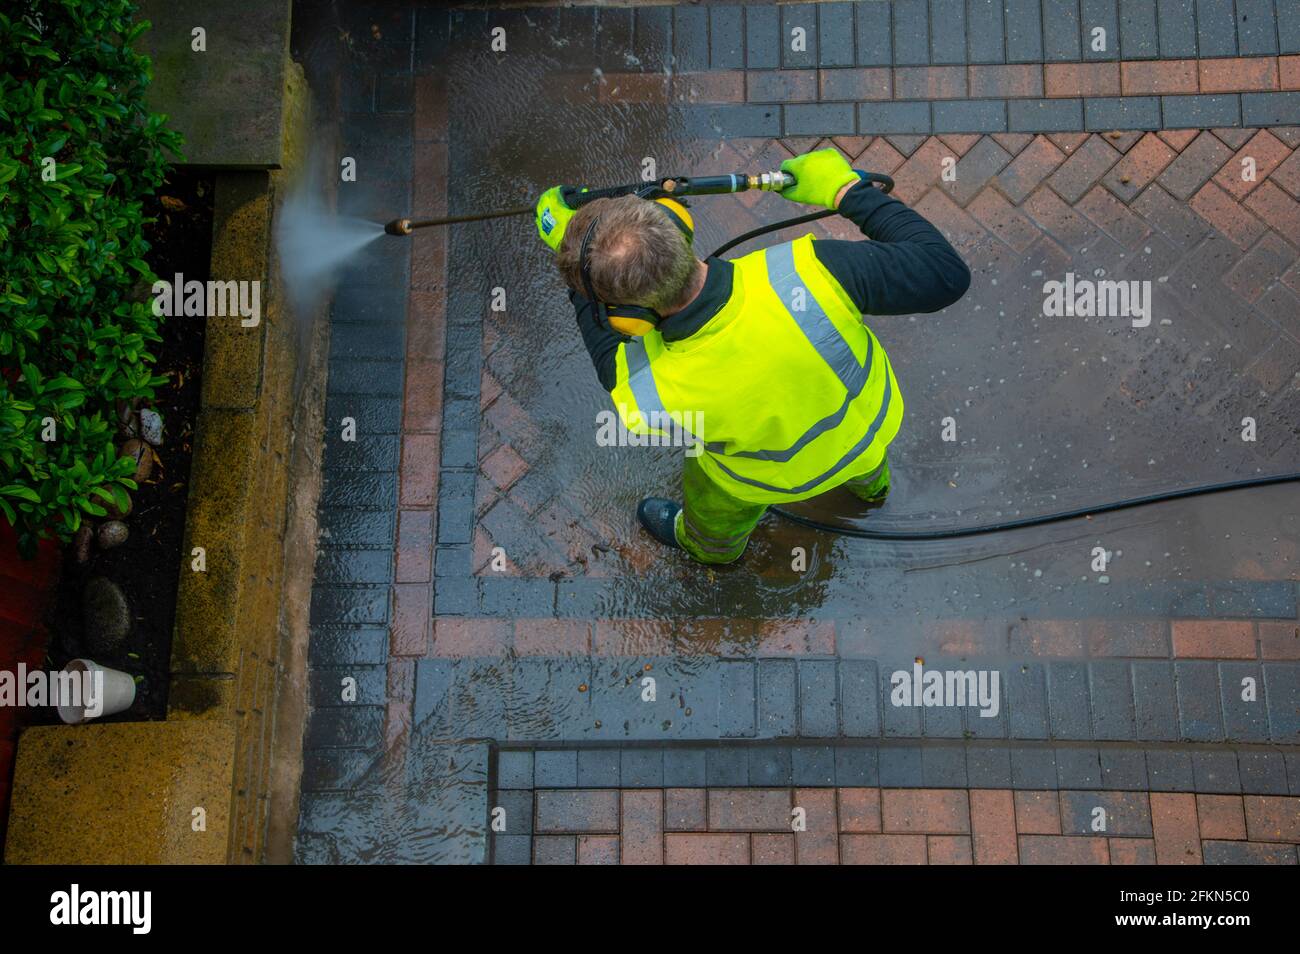 Contractors cleaning domestic block paved driveway with high pressure water Stock Photo